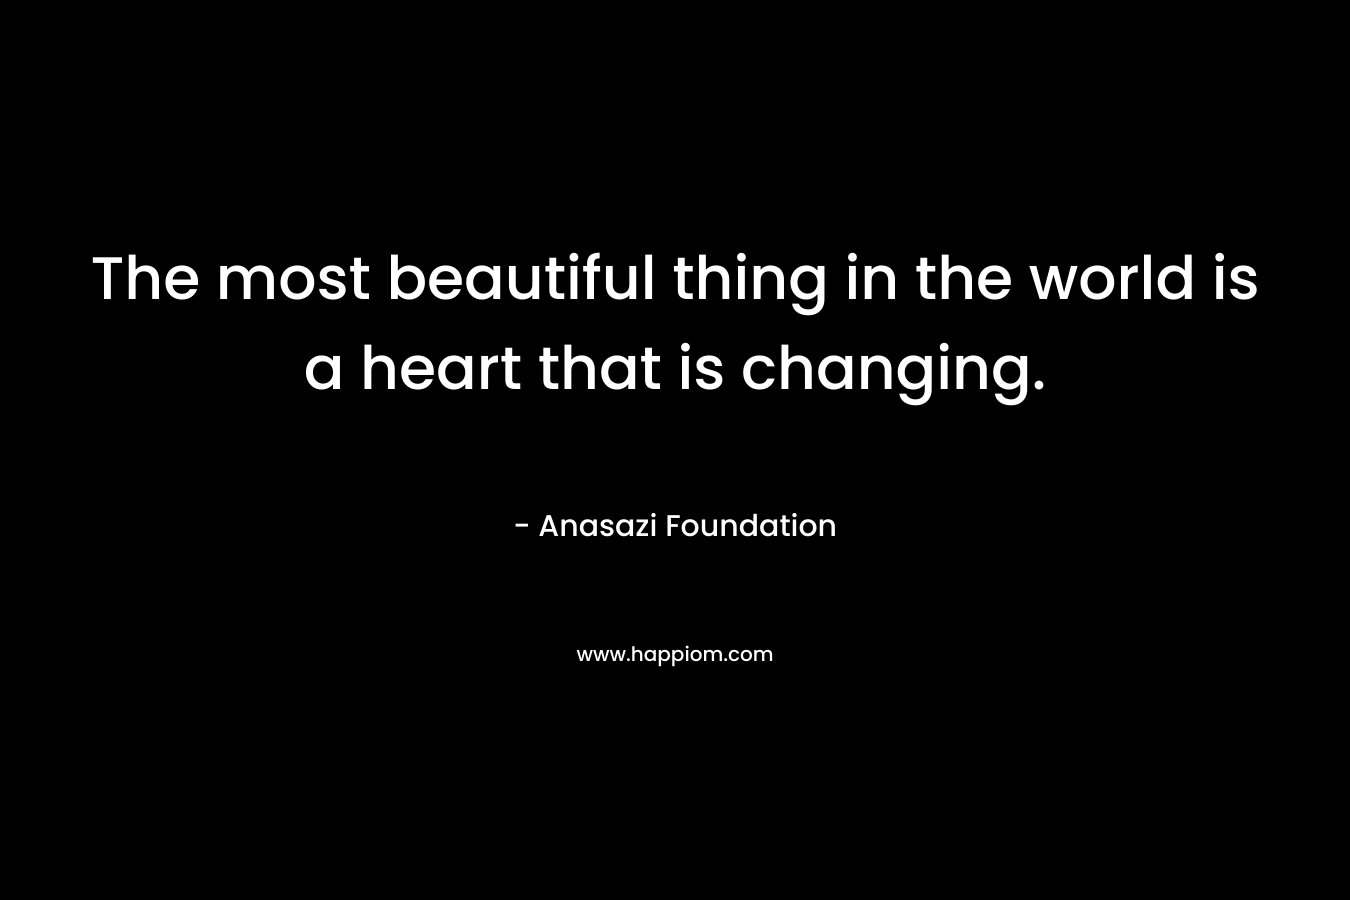 The most beautiful thing in the world is a heart that is changing. – Anasazi Foundation